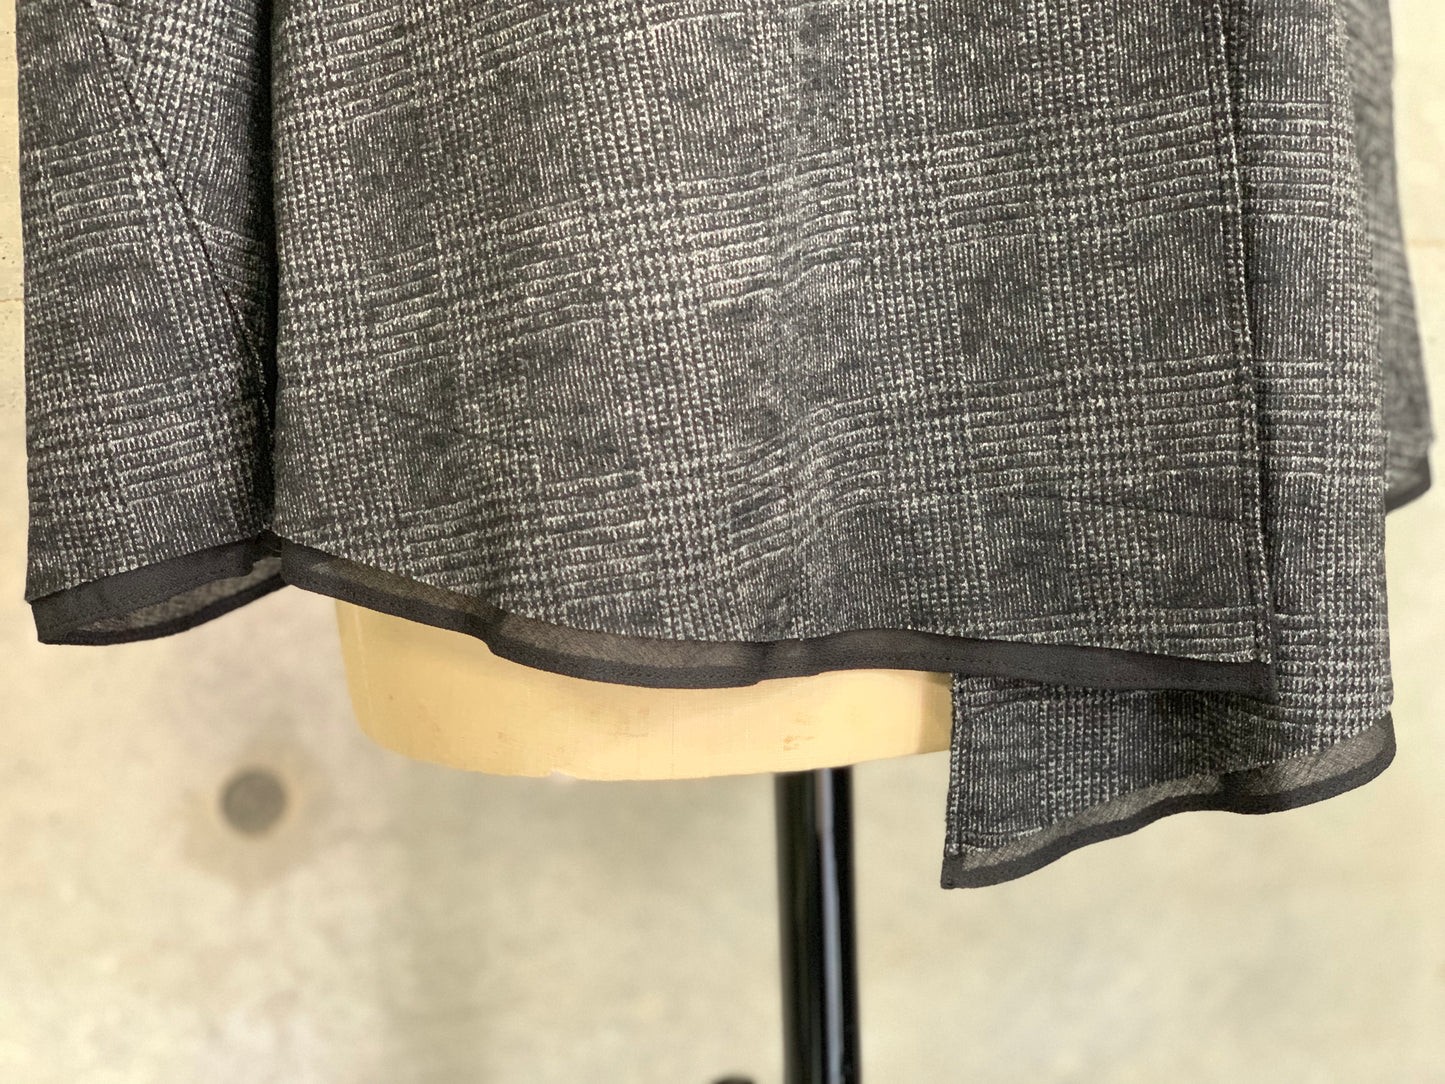 Draping Paneled Jacket in Charcoal Glen Check Wool